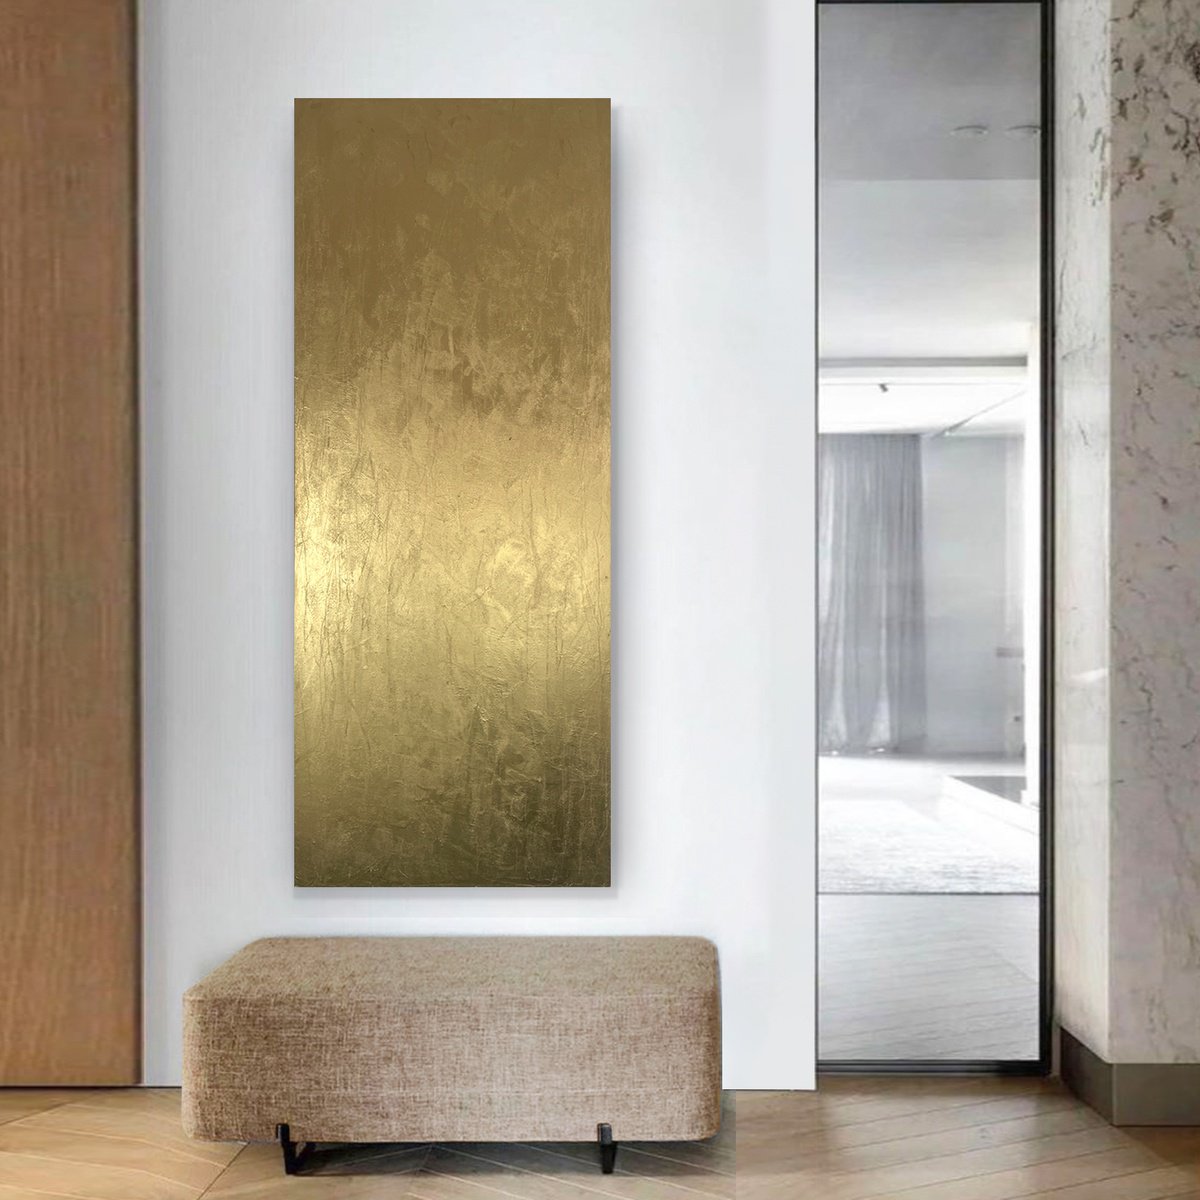 Eternal Wisdom Two - 61 x 152 cm - metallic gold paint on canvas by George Hall